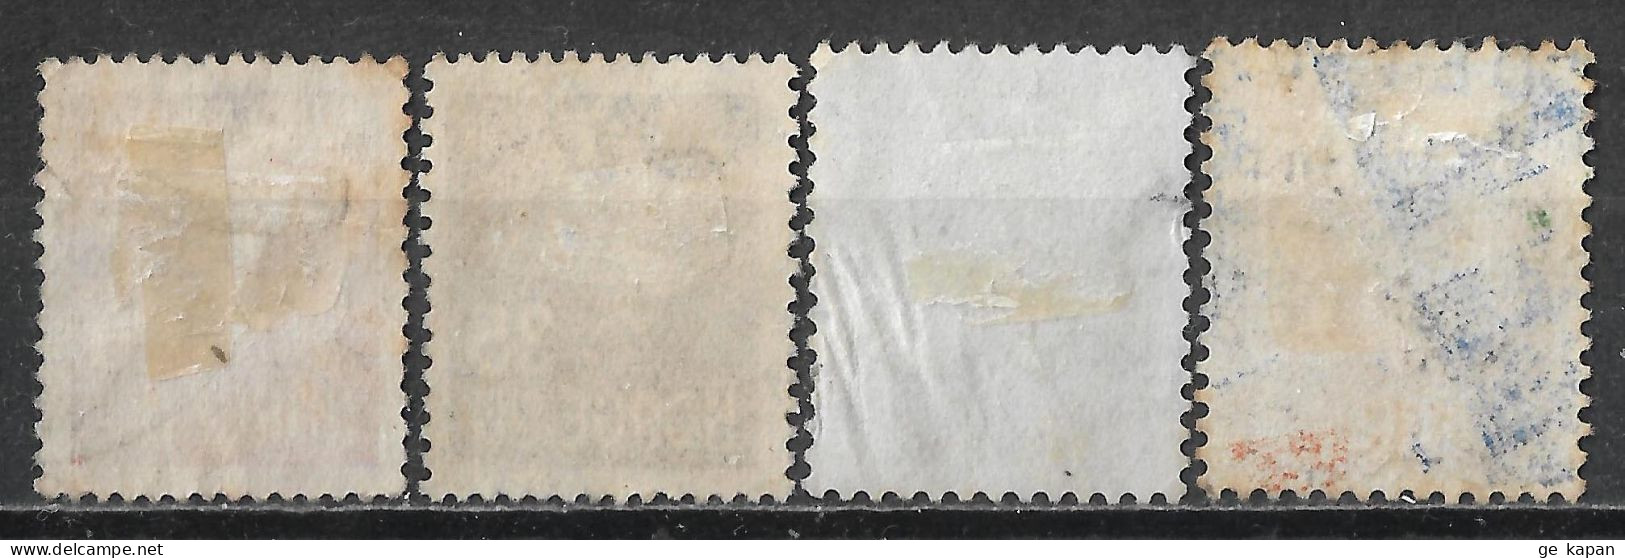 1927-1946 NORWAY SET OF 4 USED STAMPS (Michel # 124A,128A,220,321) - Gebruikt